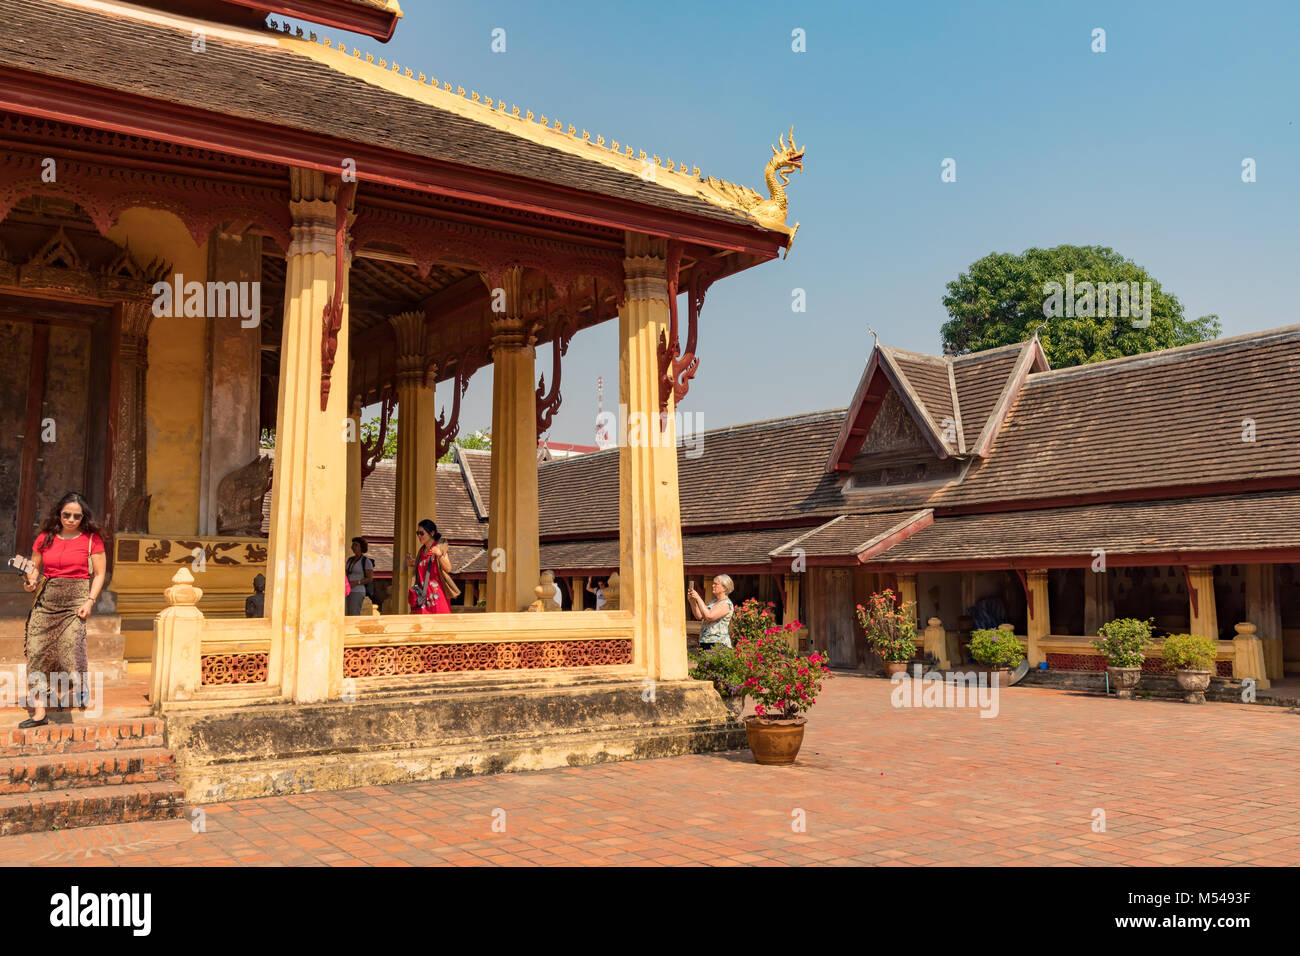 Vientiane Laos February 16, 2018 Wooden architecture at early 19th century Wat Sisaket. Stock Photo